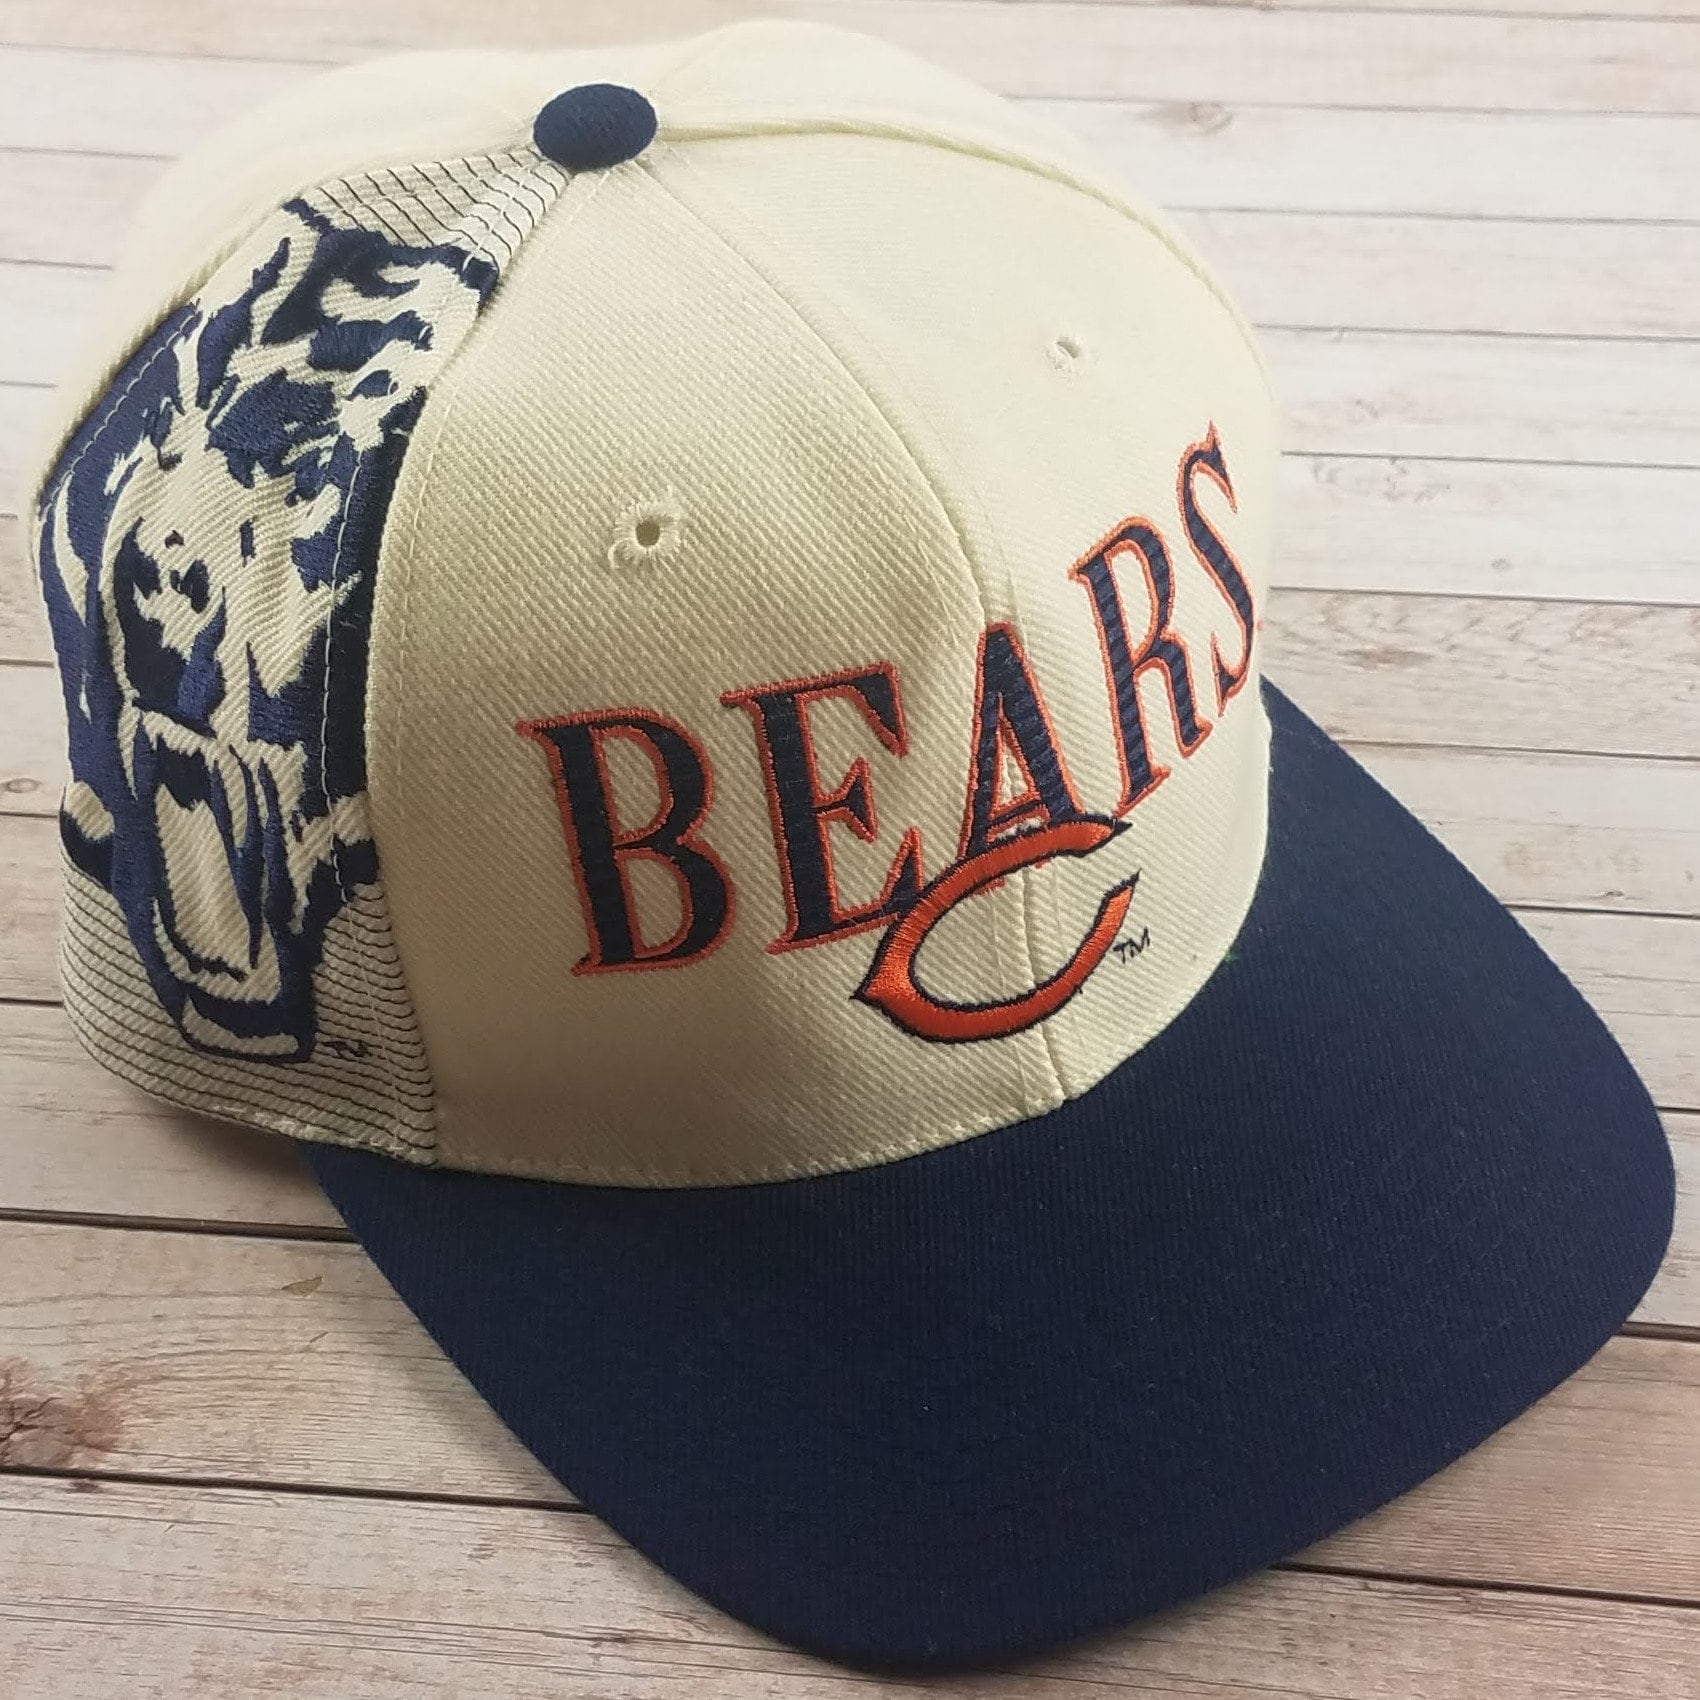 Vintage Chicago Bears SnapBack Hat Cap 90s Christmas Vacation Clark Griswold  USA